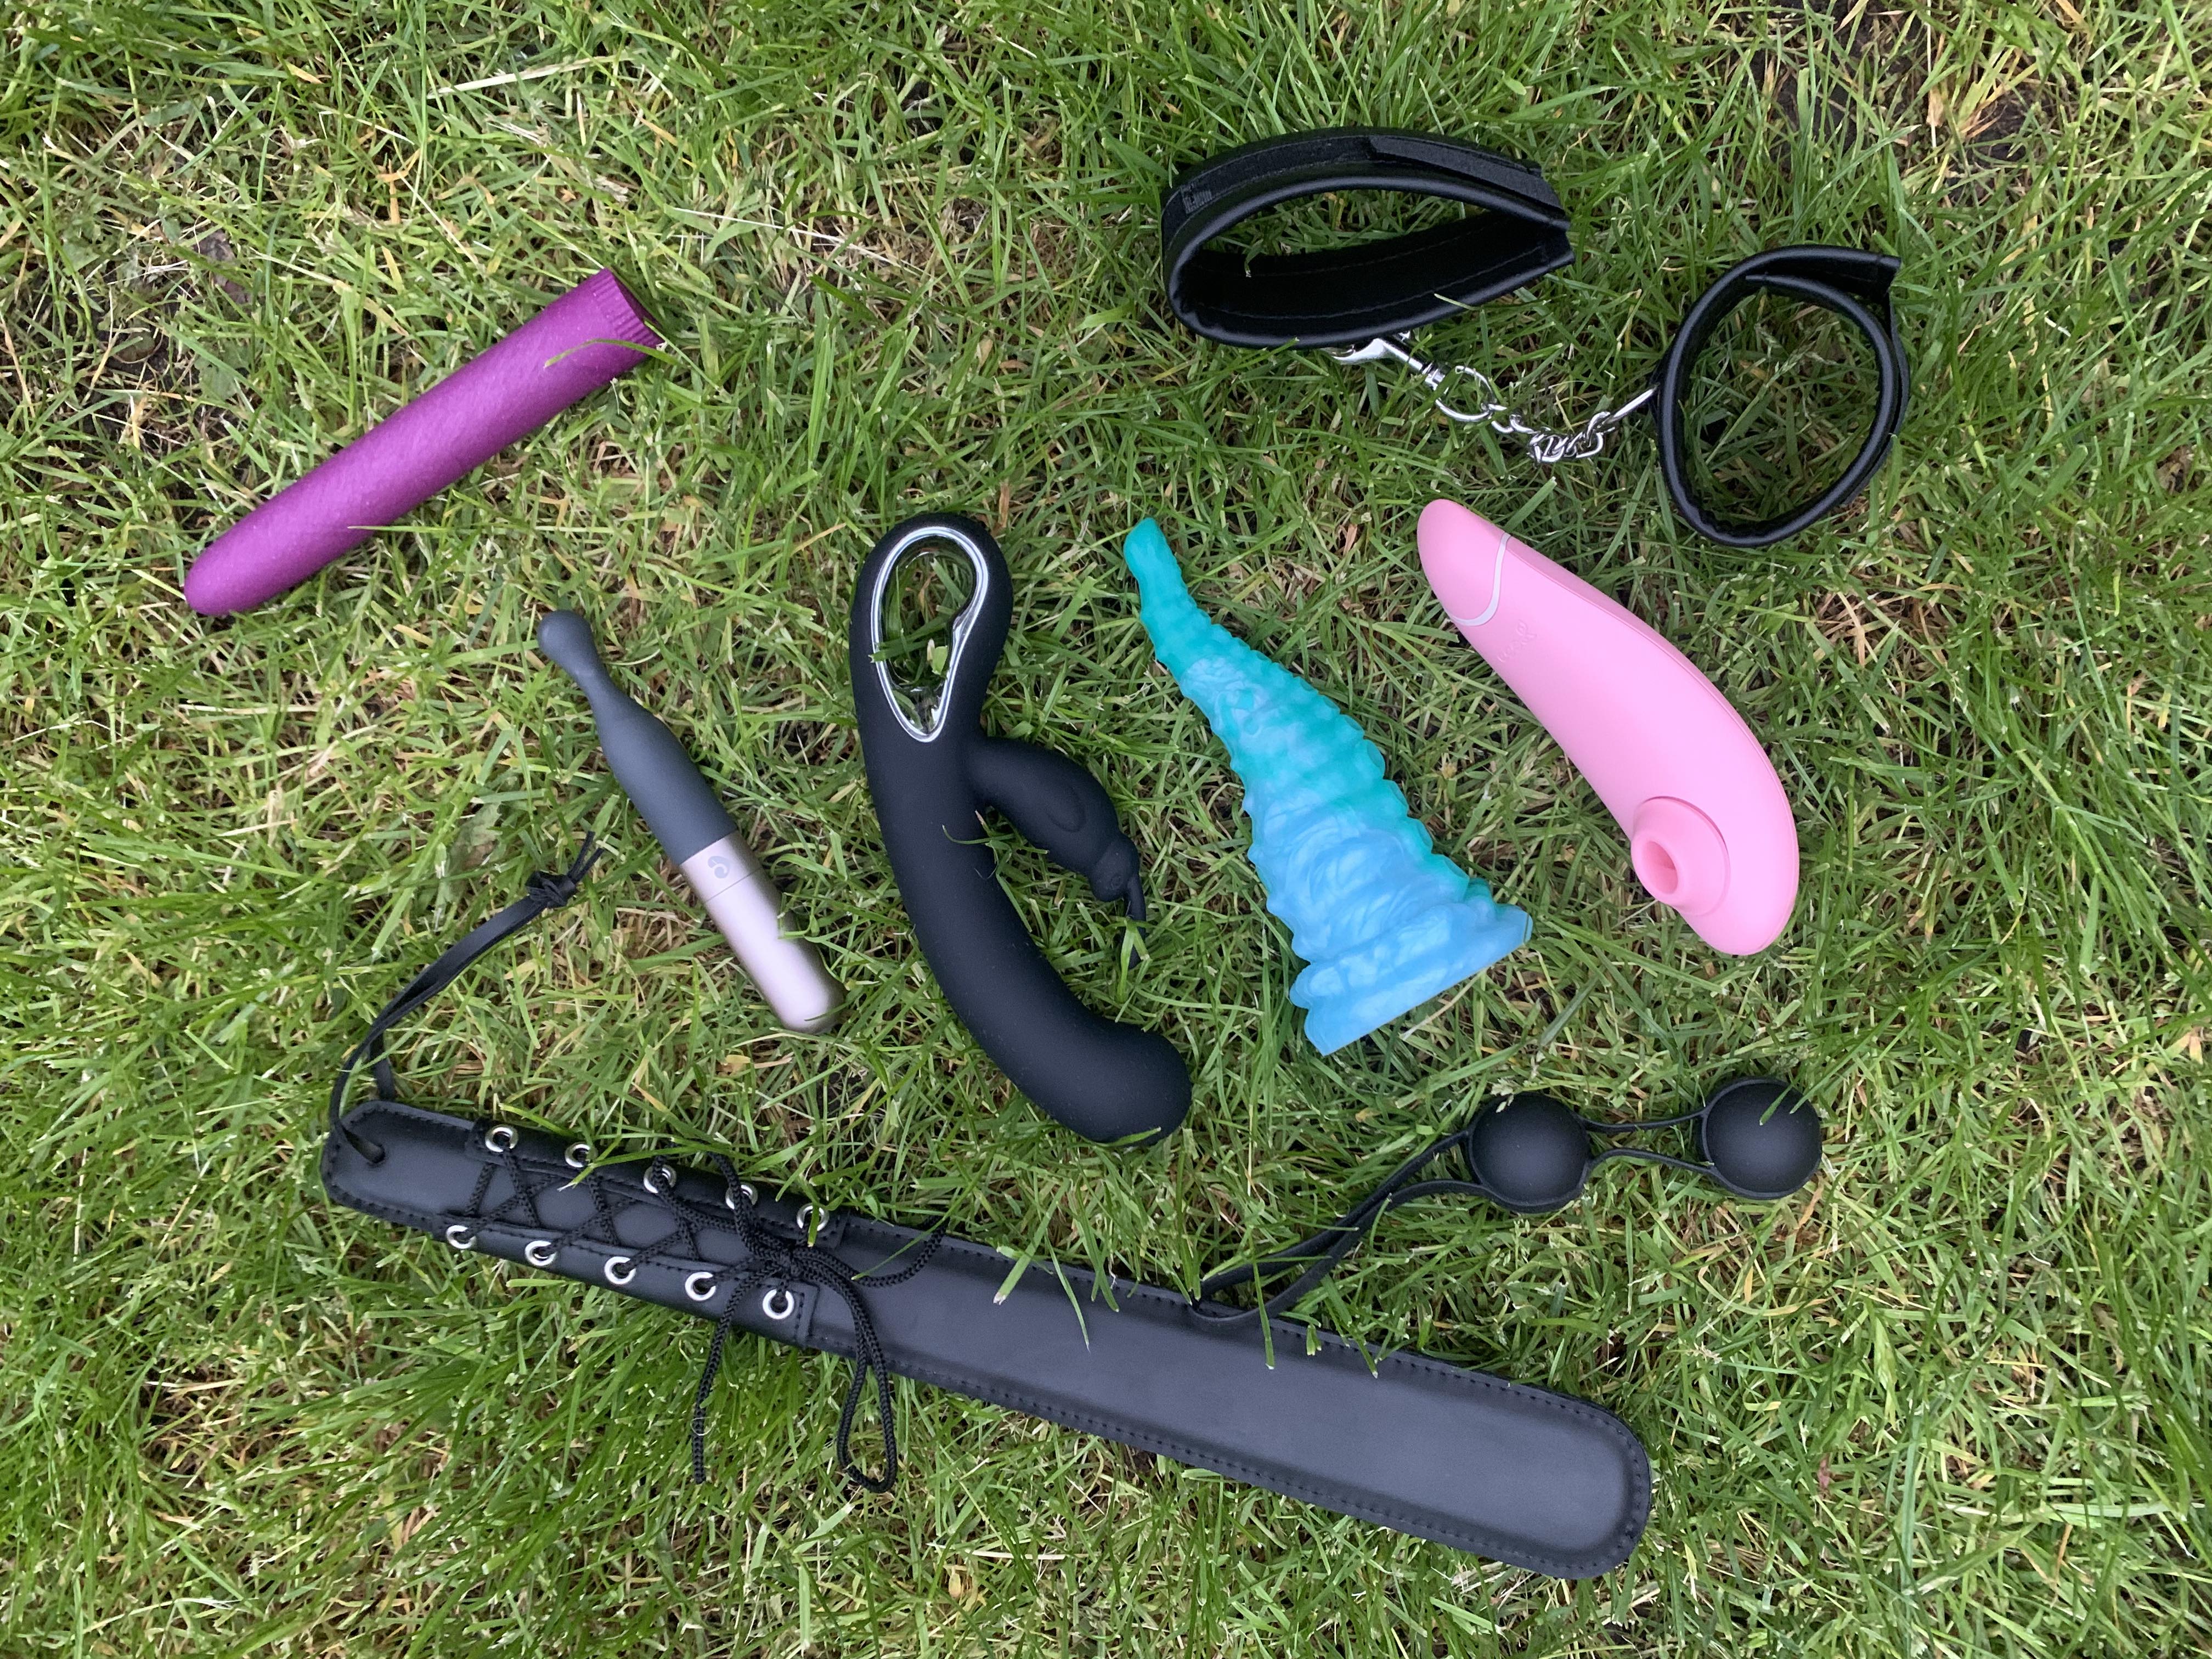 the collection of eco-friendly sex toys